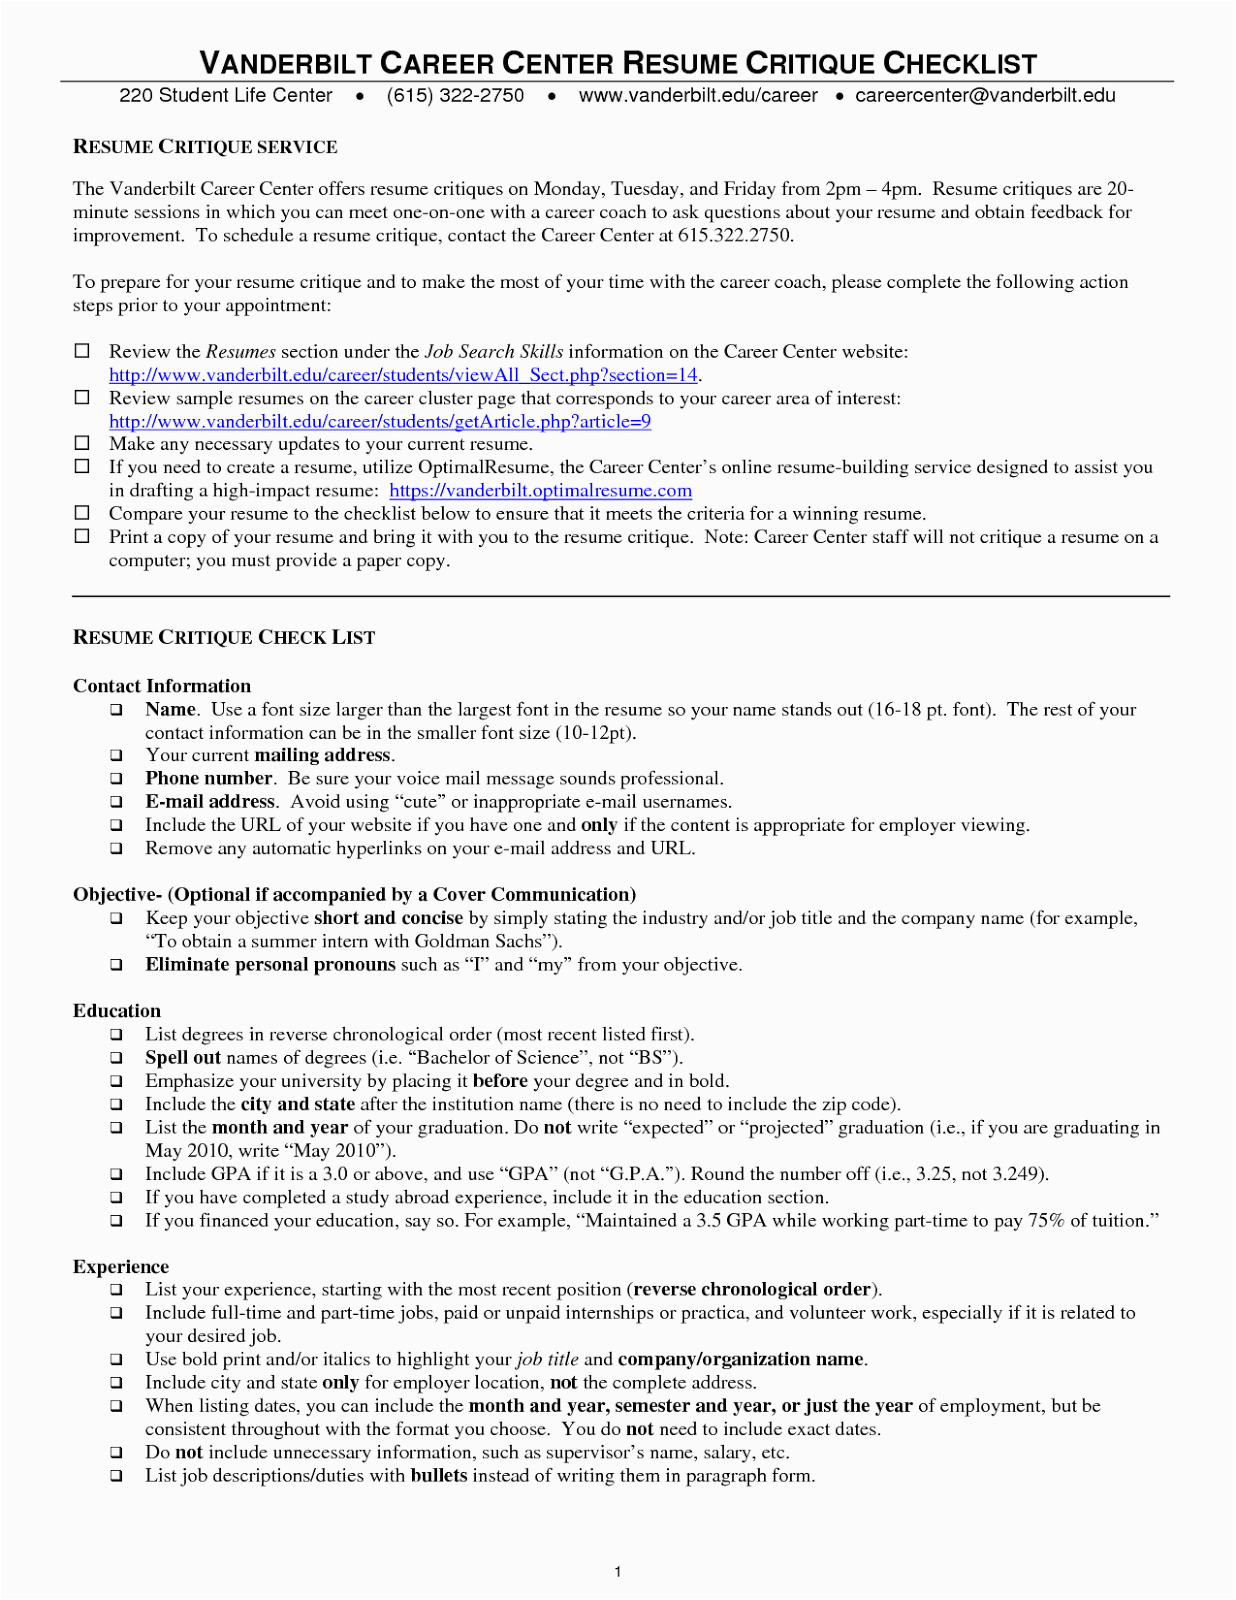 Resume Templates for Law School Applications Sample Of A Resume for Law School Tipss Und Vorlagen